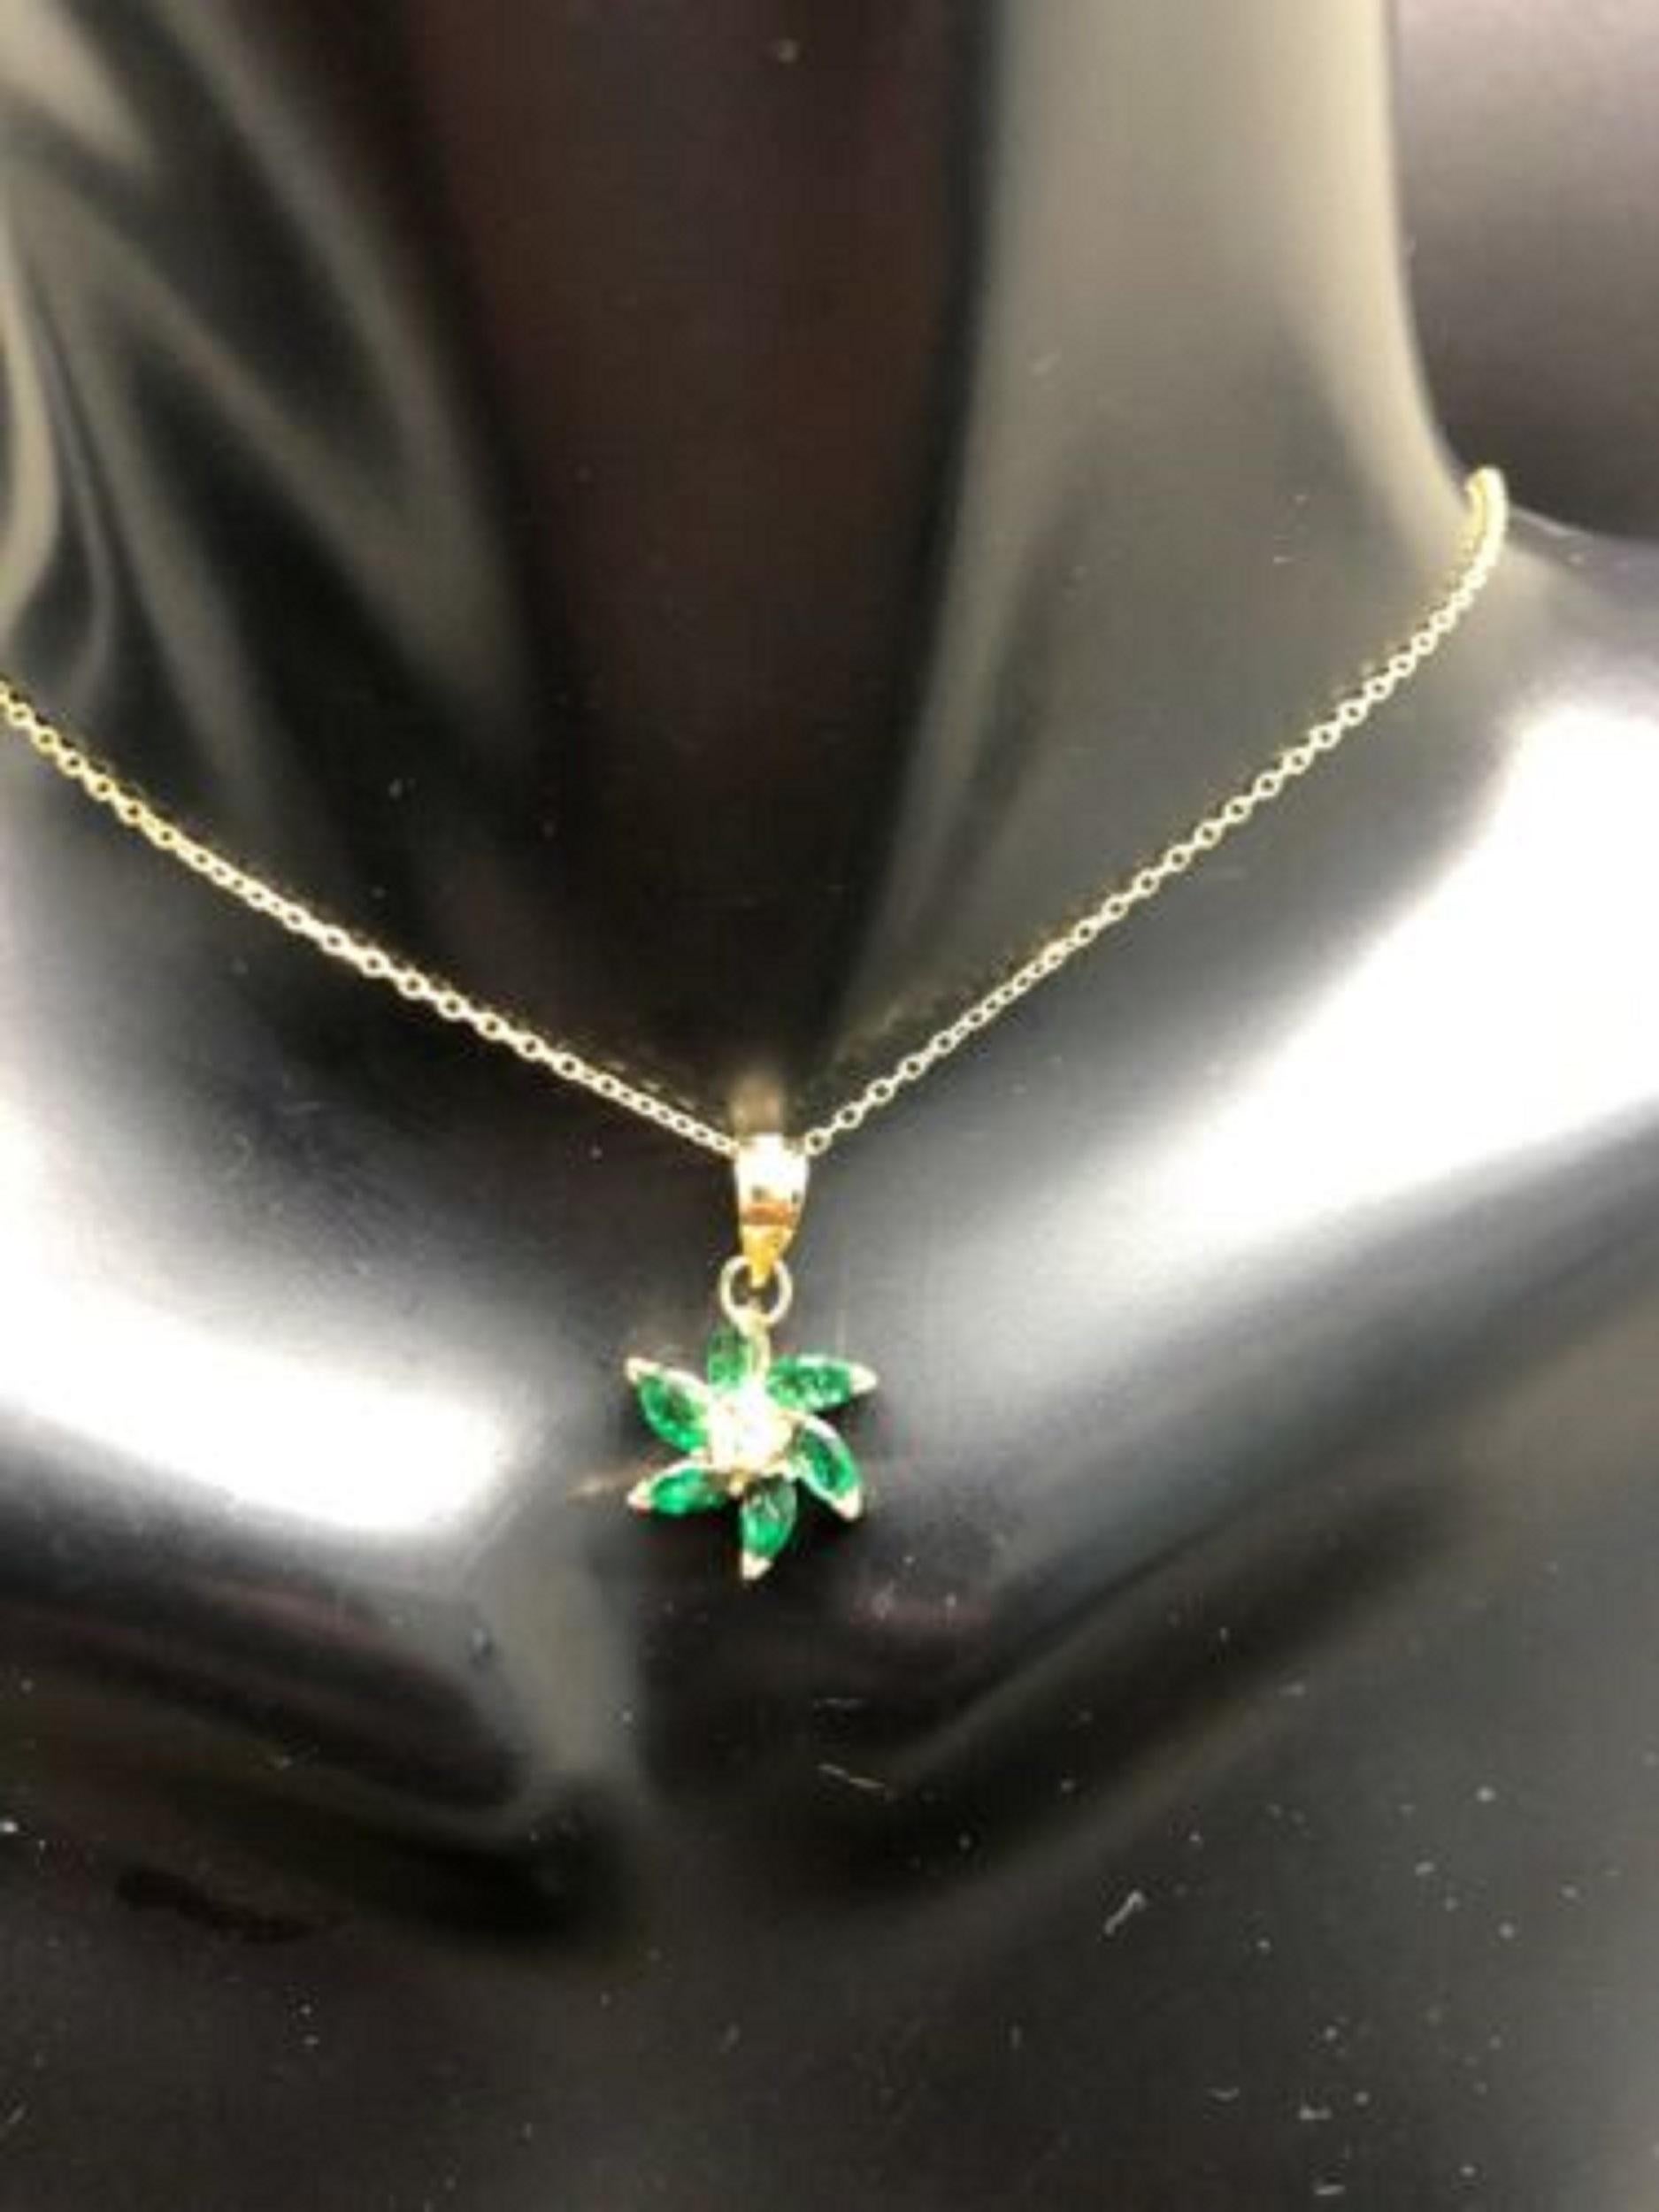 Up for sale:

This absolutely stunning solid 14k yellow gold emerald  marquise cut with round cut natural diamond accent flower pendant chain necklace. The necklace is featuring a stunning 0.50 carat emeralds and diamond accent; G color; VS clarity;